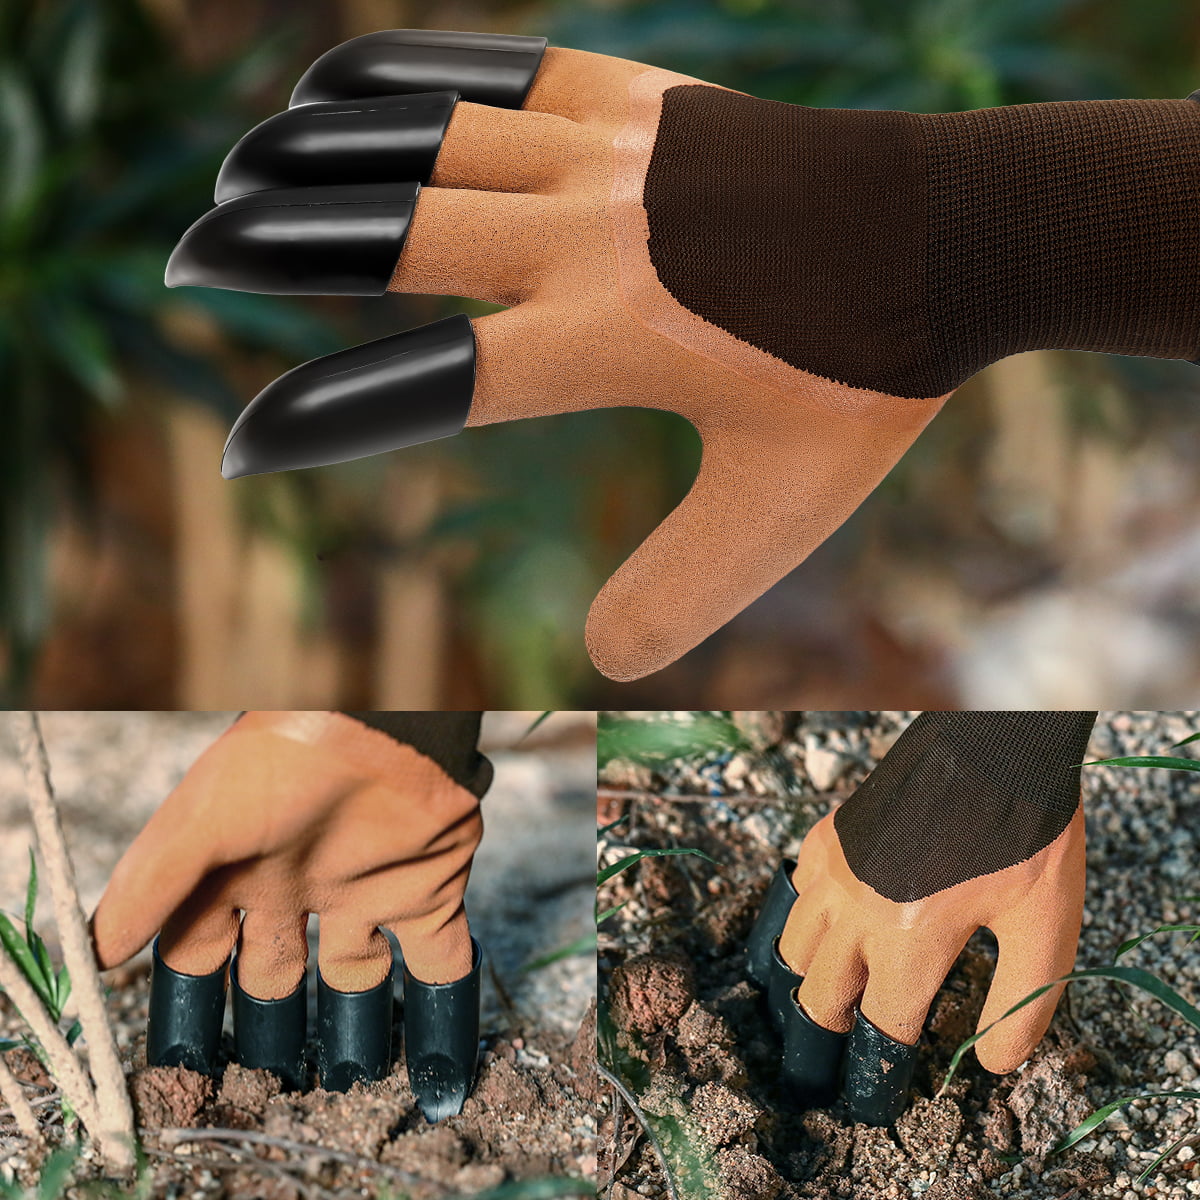 Garden Digging Gloves With ABS Claws For Digging Planting Gardening Raking 